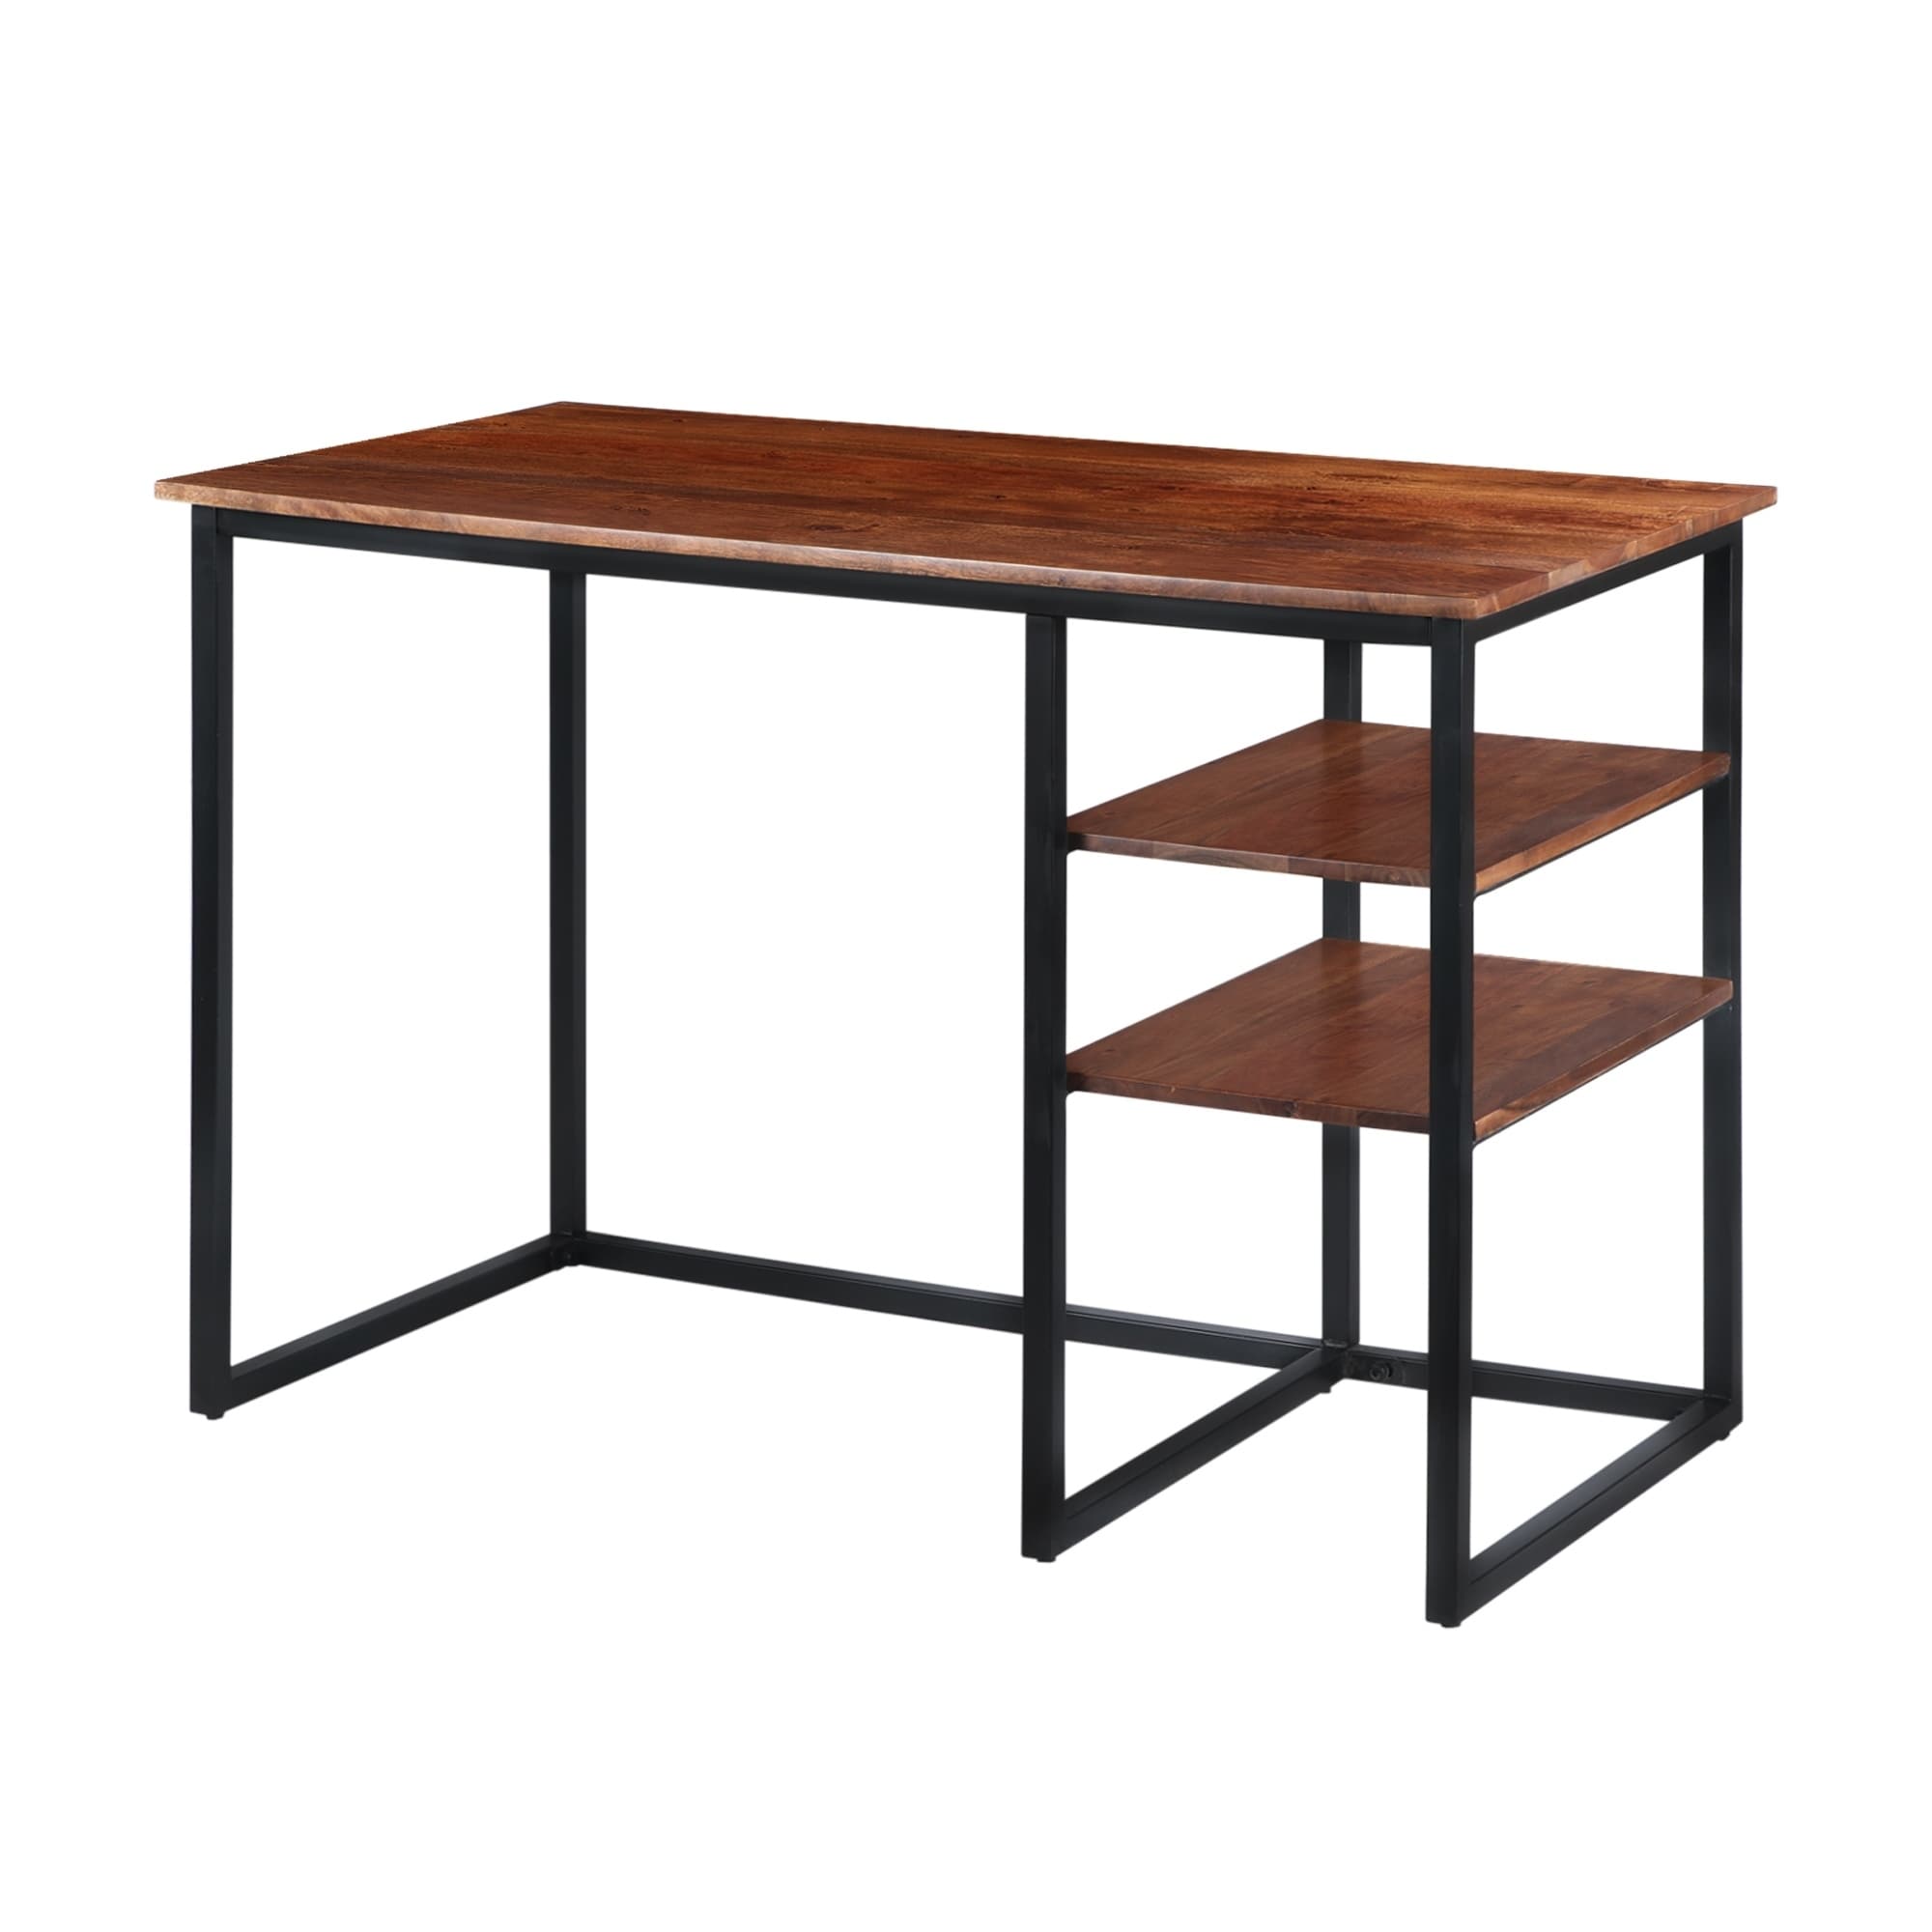 Shop 45 Inch Tubular Metal Frame Desk With Wooden Top And 2 Side